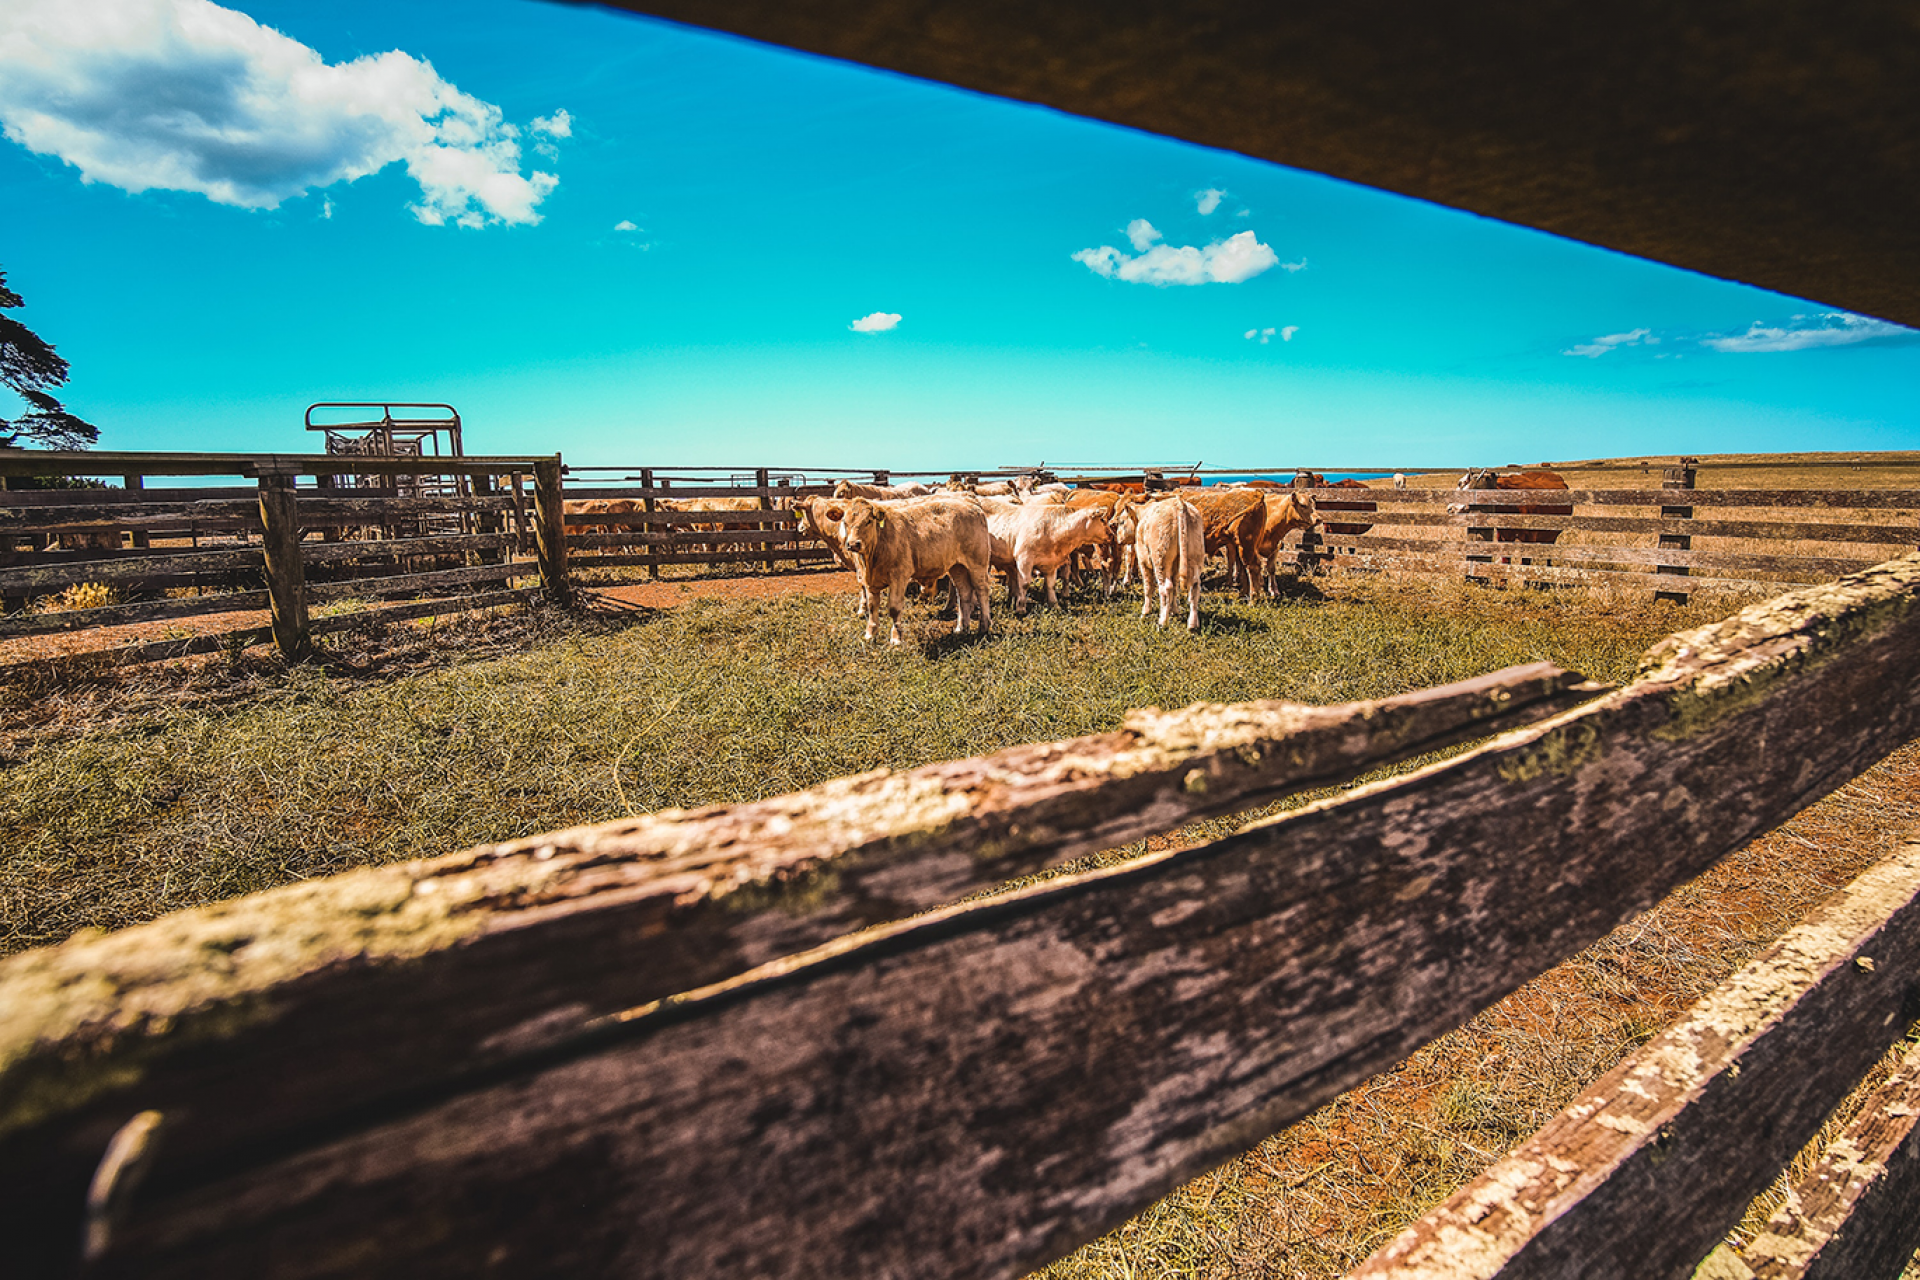 View through wooden cattle panels of cows standing around old cattle handling equipment